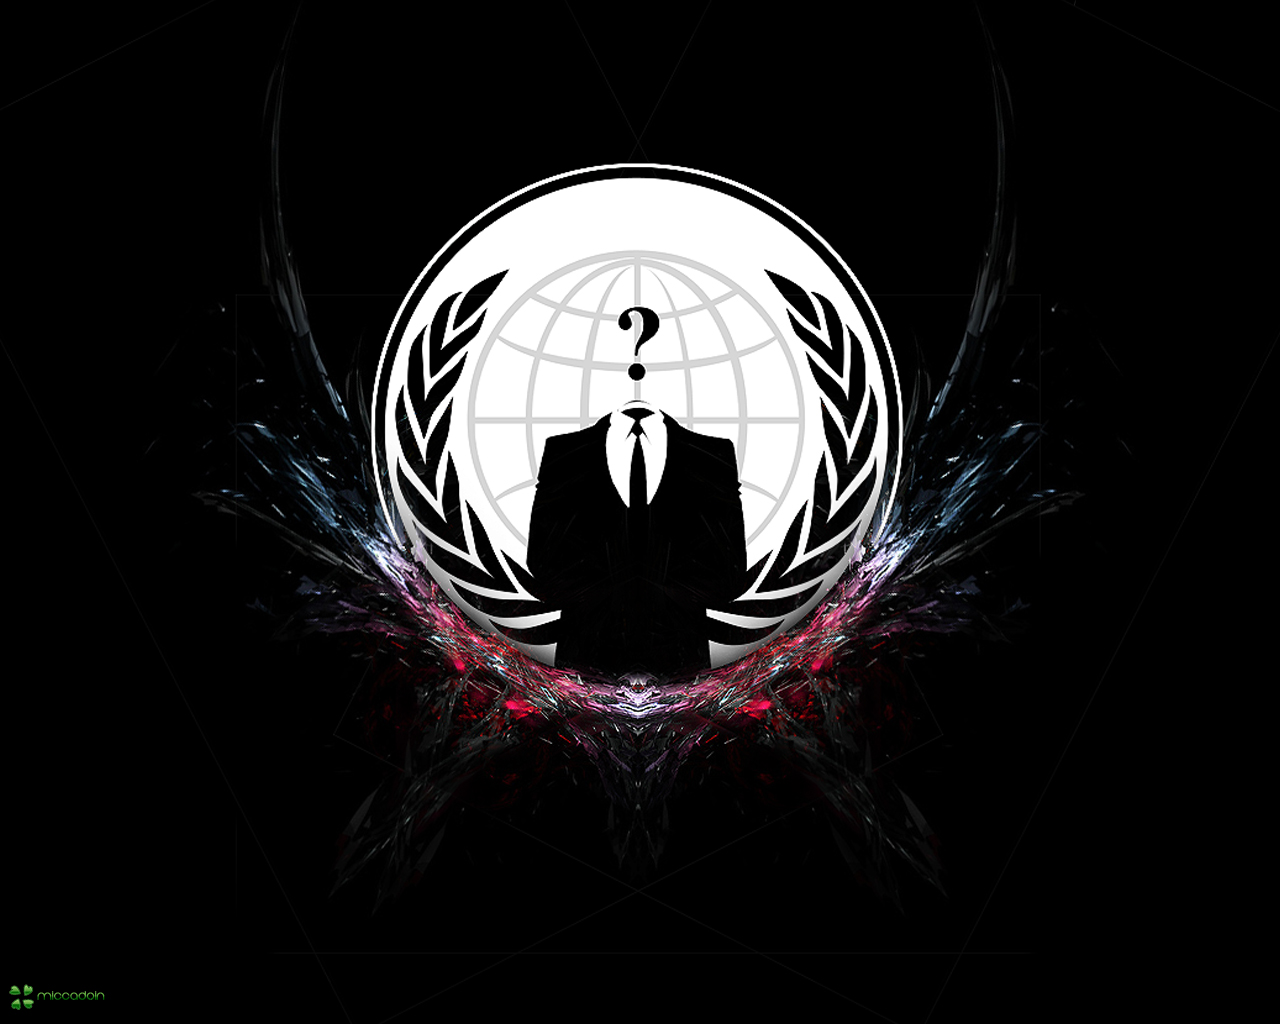 Anonymous Hacking Wallpaper 1280x1024 Anonymous Hacking